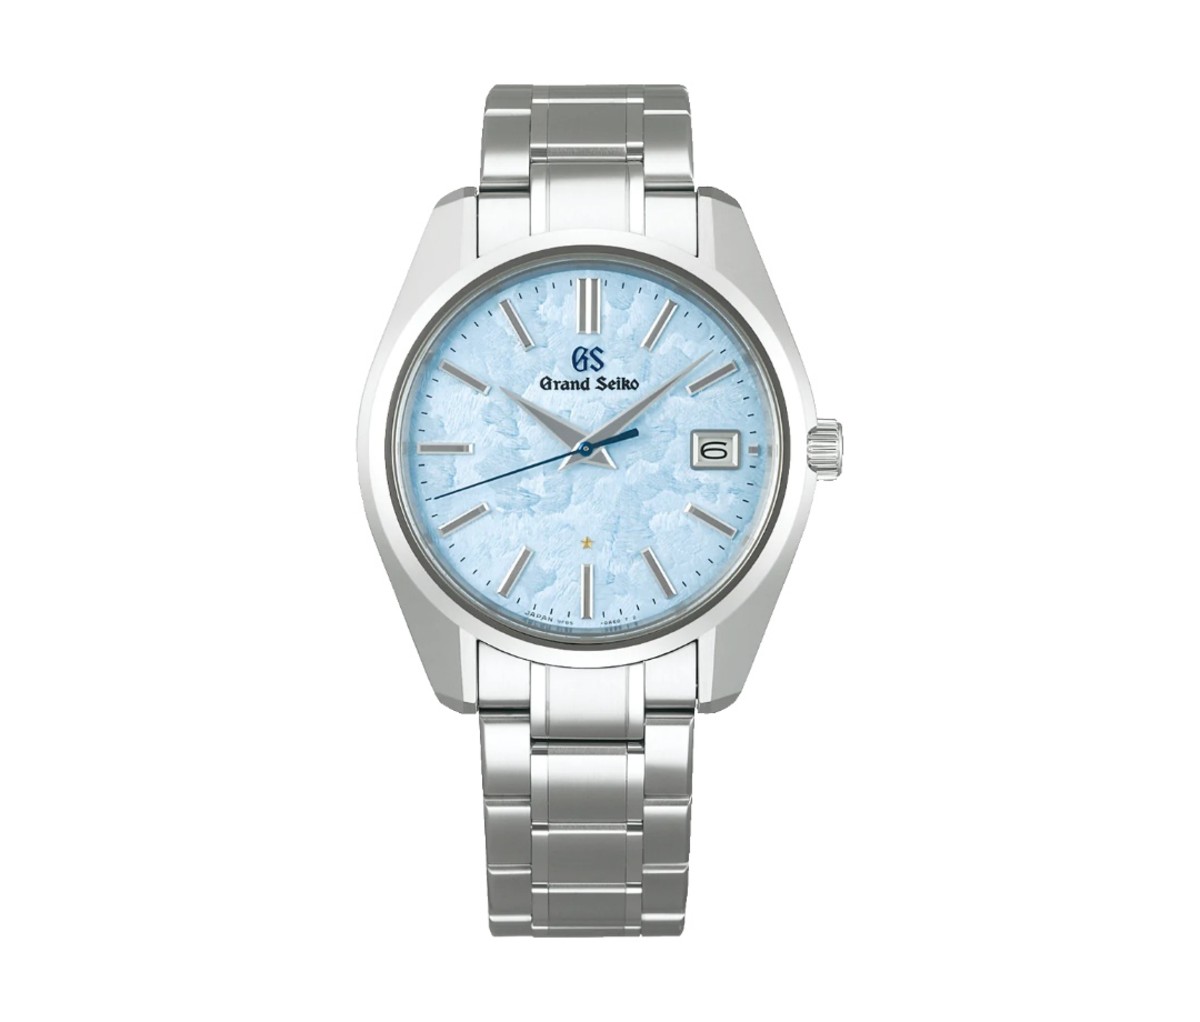 Grand Seiko SBGP017 with a blue dial on a white background.